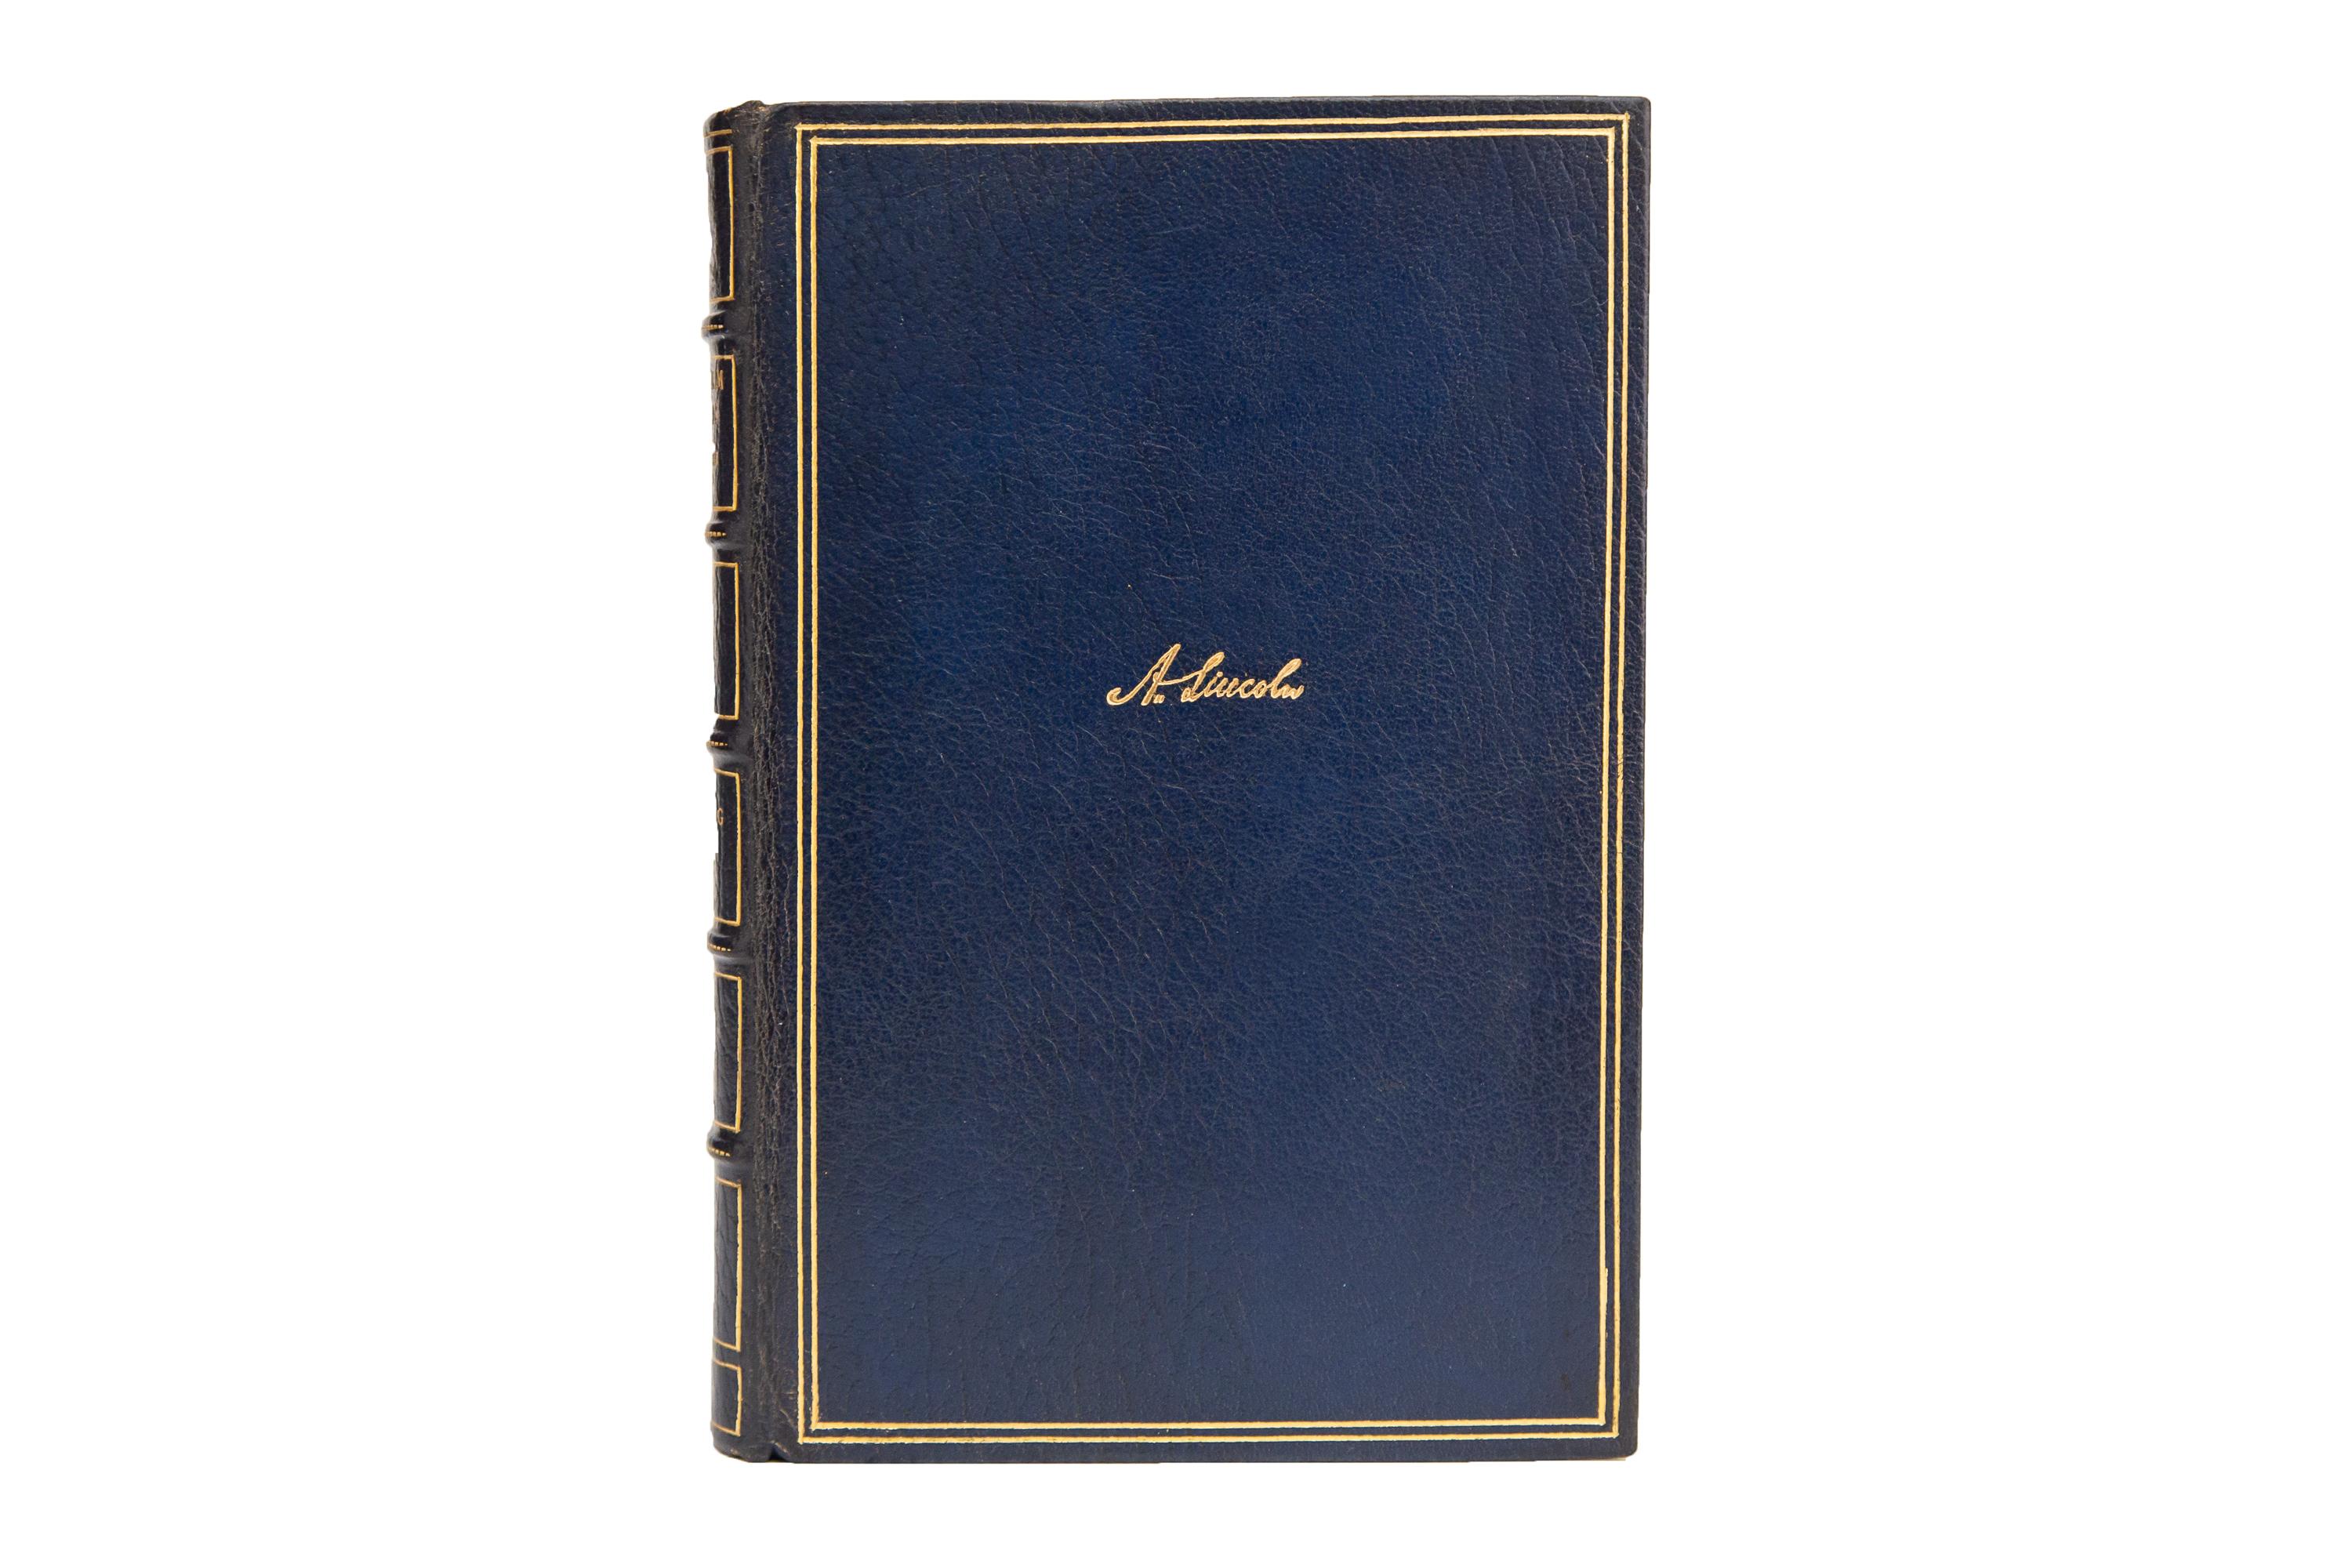 6 Volumes. Carl Sandburg, Abraham Lincoln: The War Years. Bound in full navy morocco with covers displaying double-ruled borders as well as 